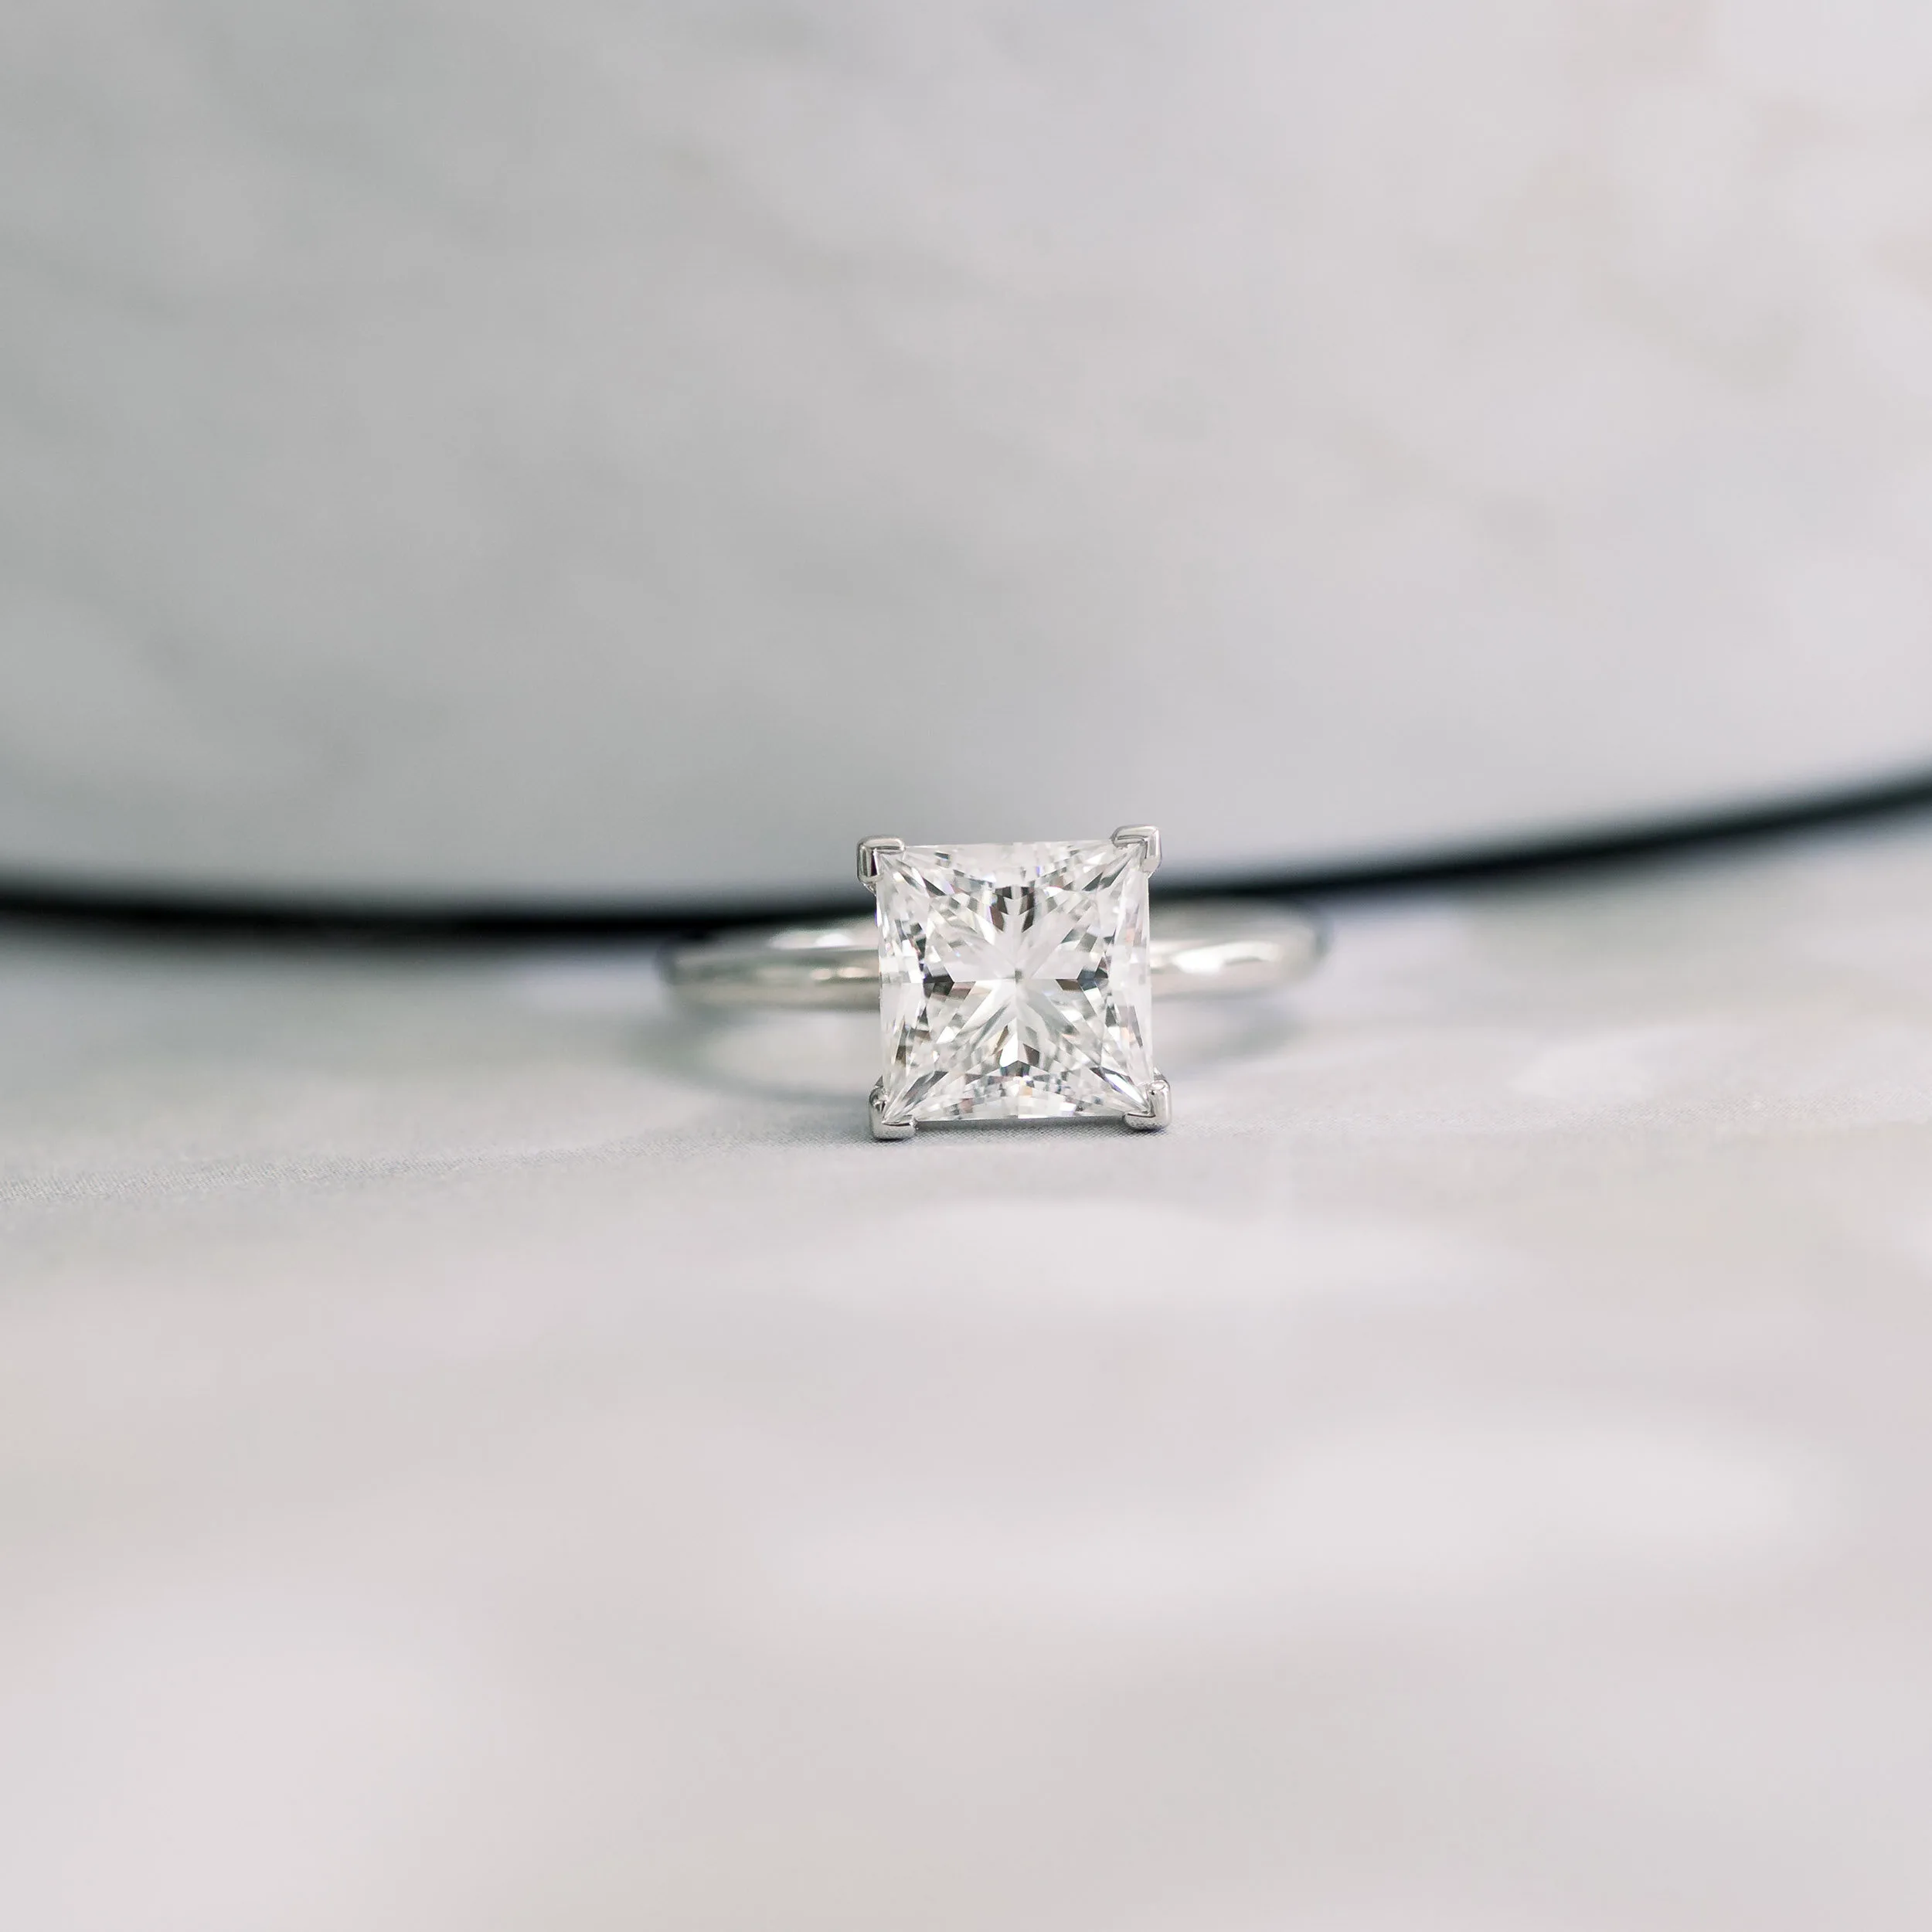 2ct princess cut in solitaire